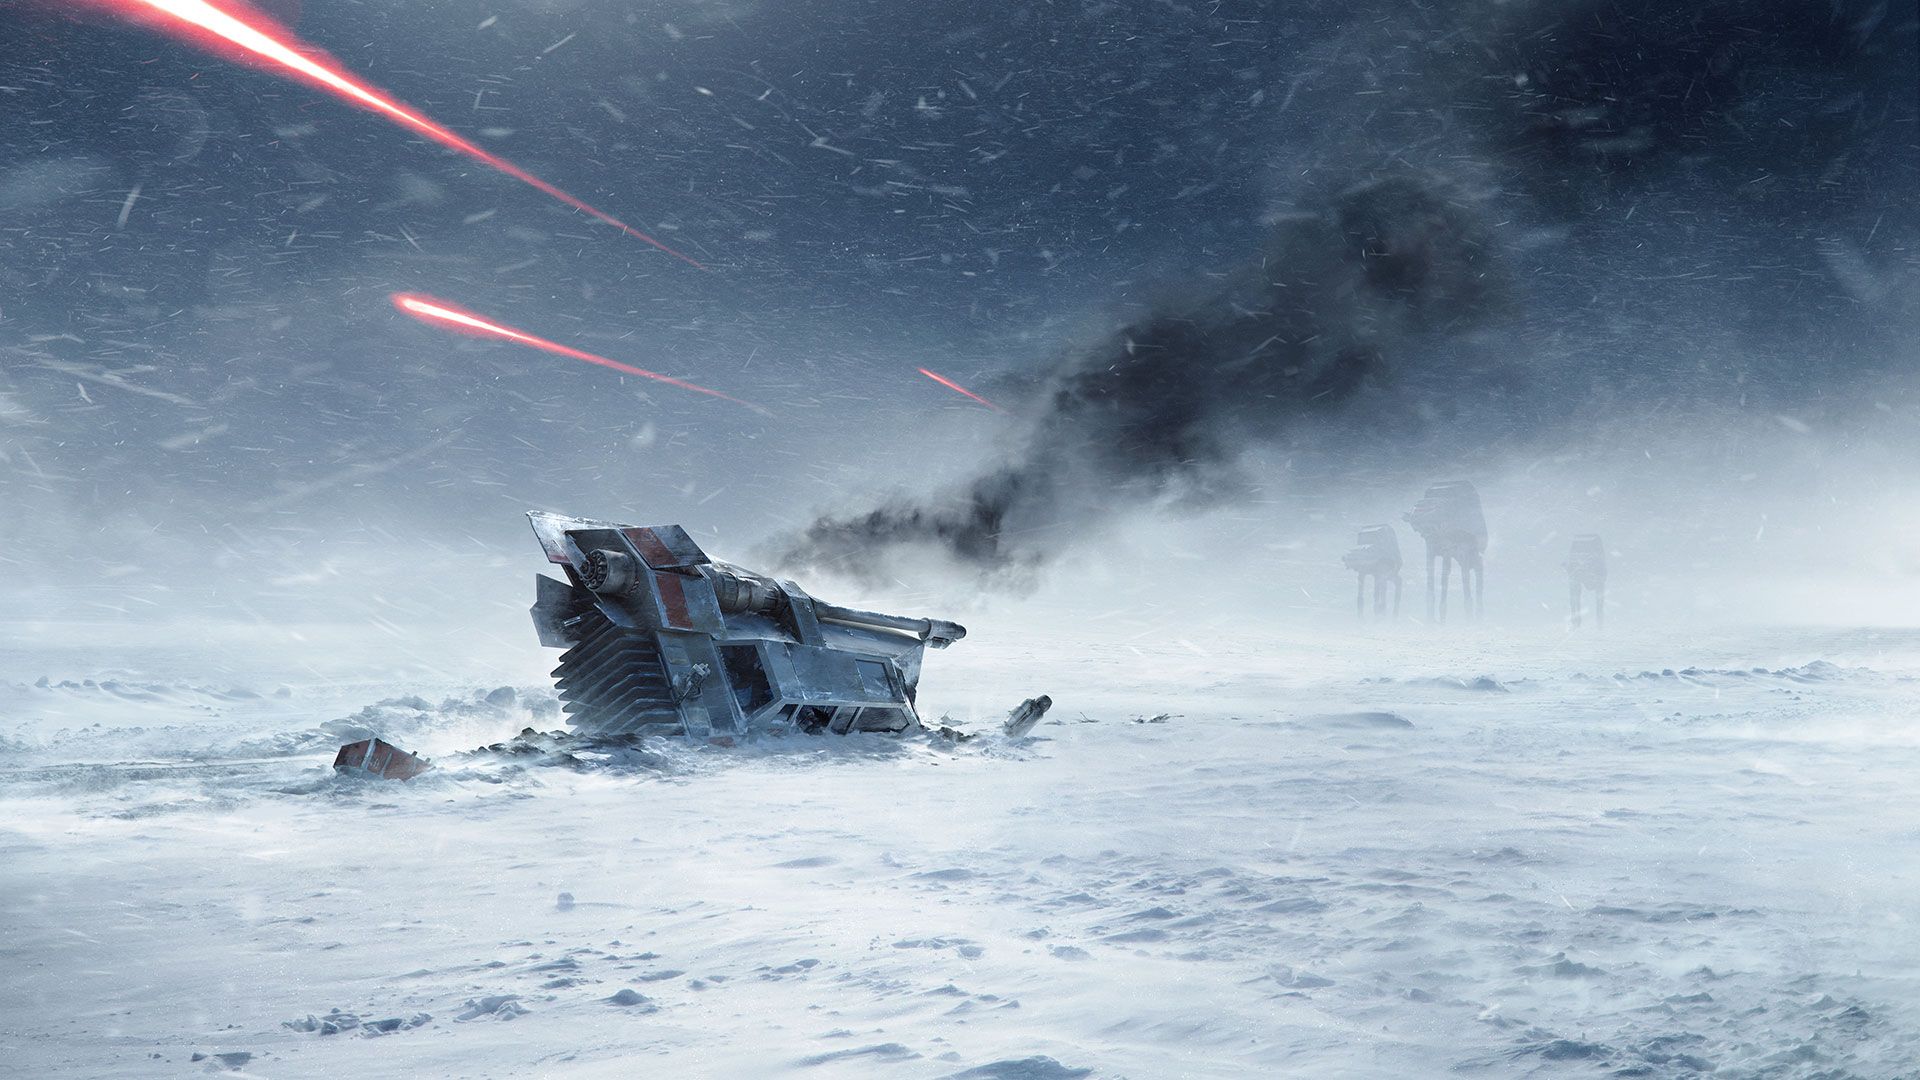 The Battle for Hoth [1920x1080]